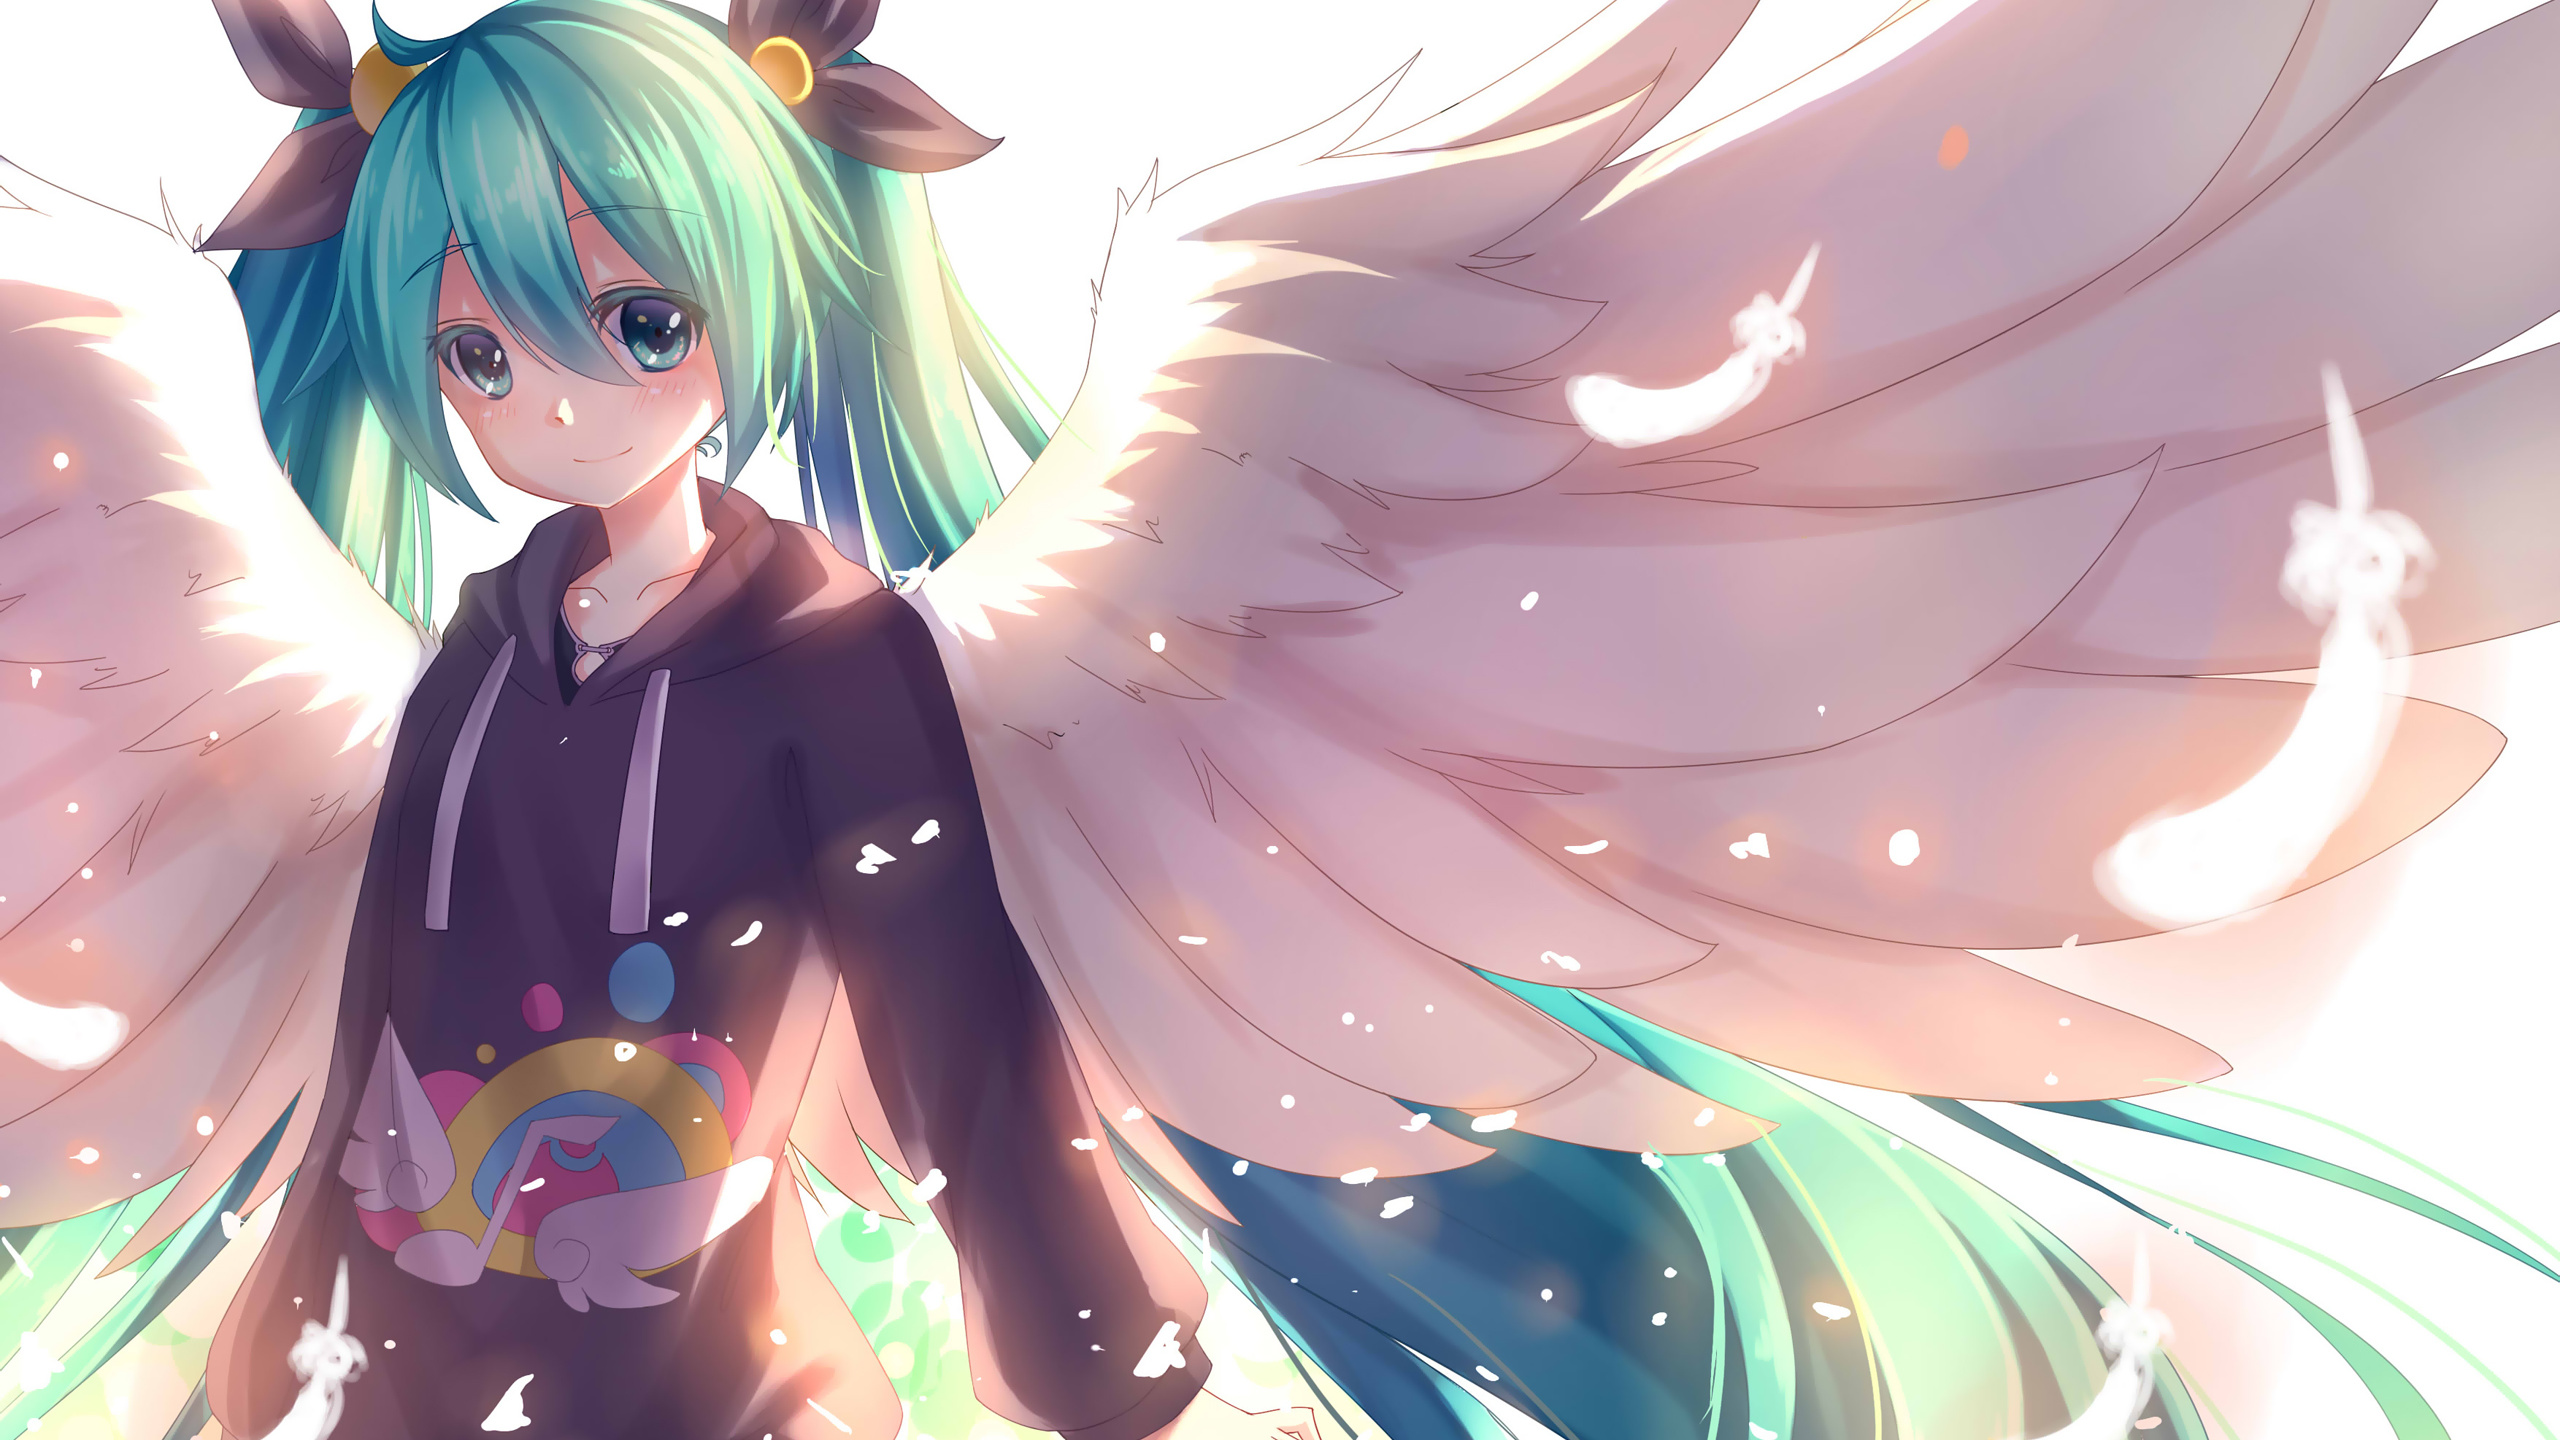 Blue Haired Girl Anime Character. Wallpaper in 2560x1440 Resolution